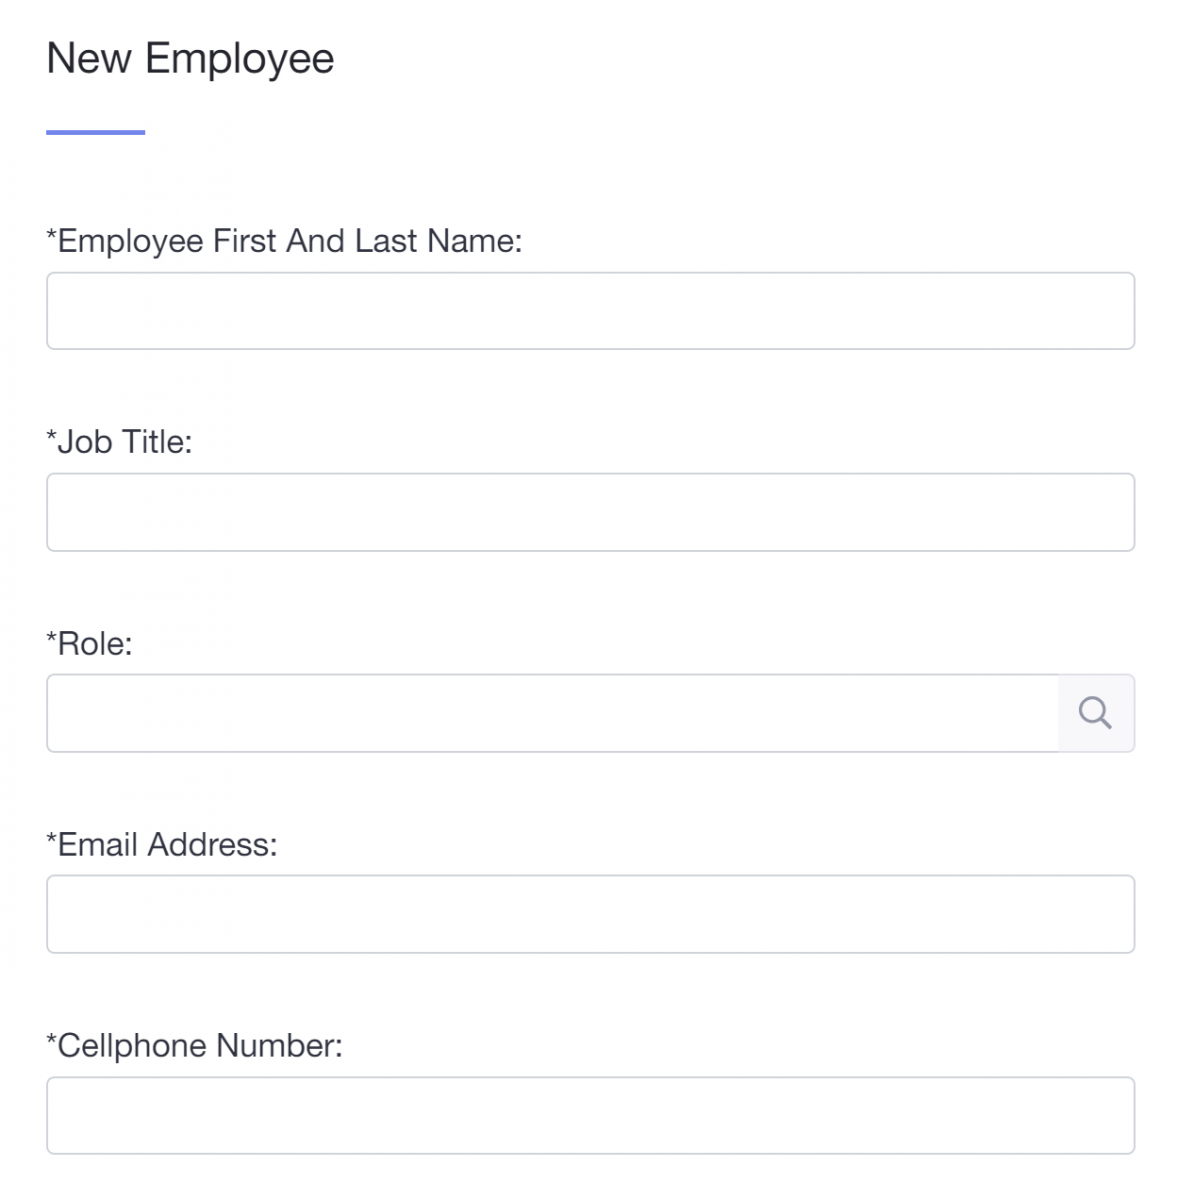 New employee form